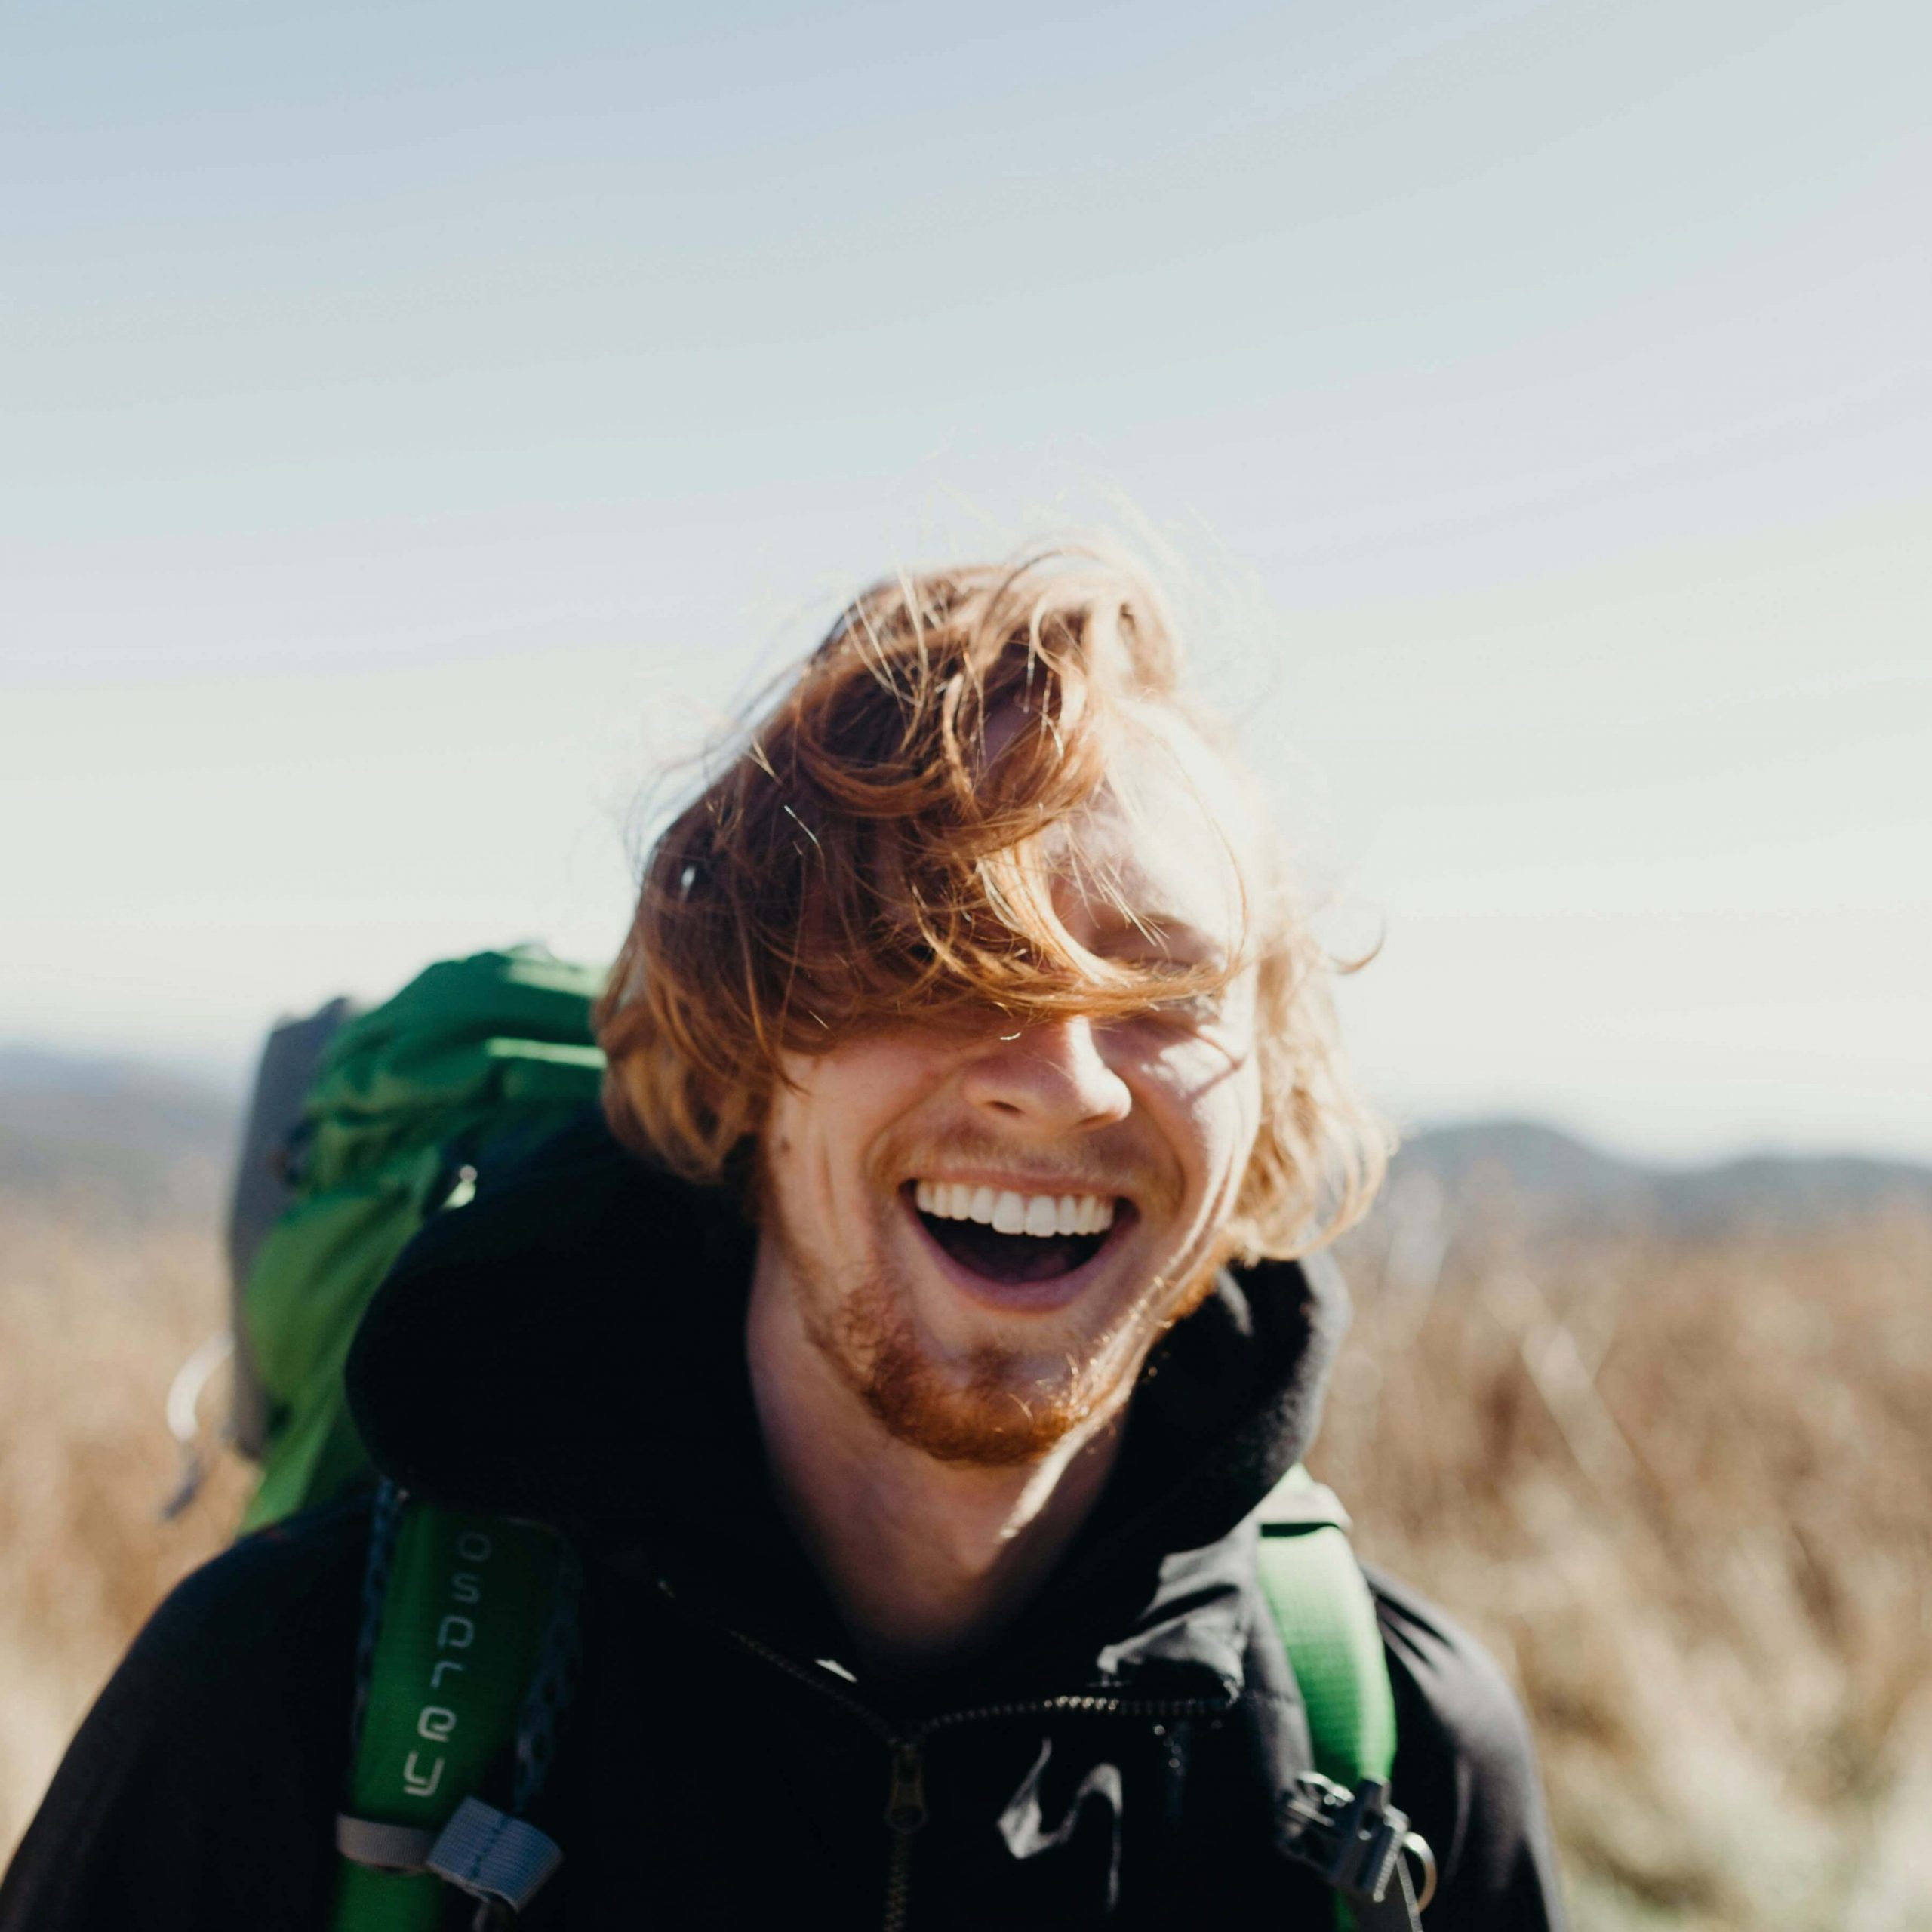 Image of a smiling man hiking on a sunny day. If you struggle with anxiety, discover how neurofeedback therapy in Denver, CO can help you manage your symptoms.